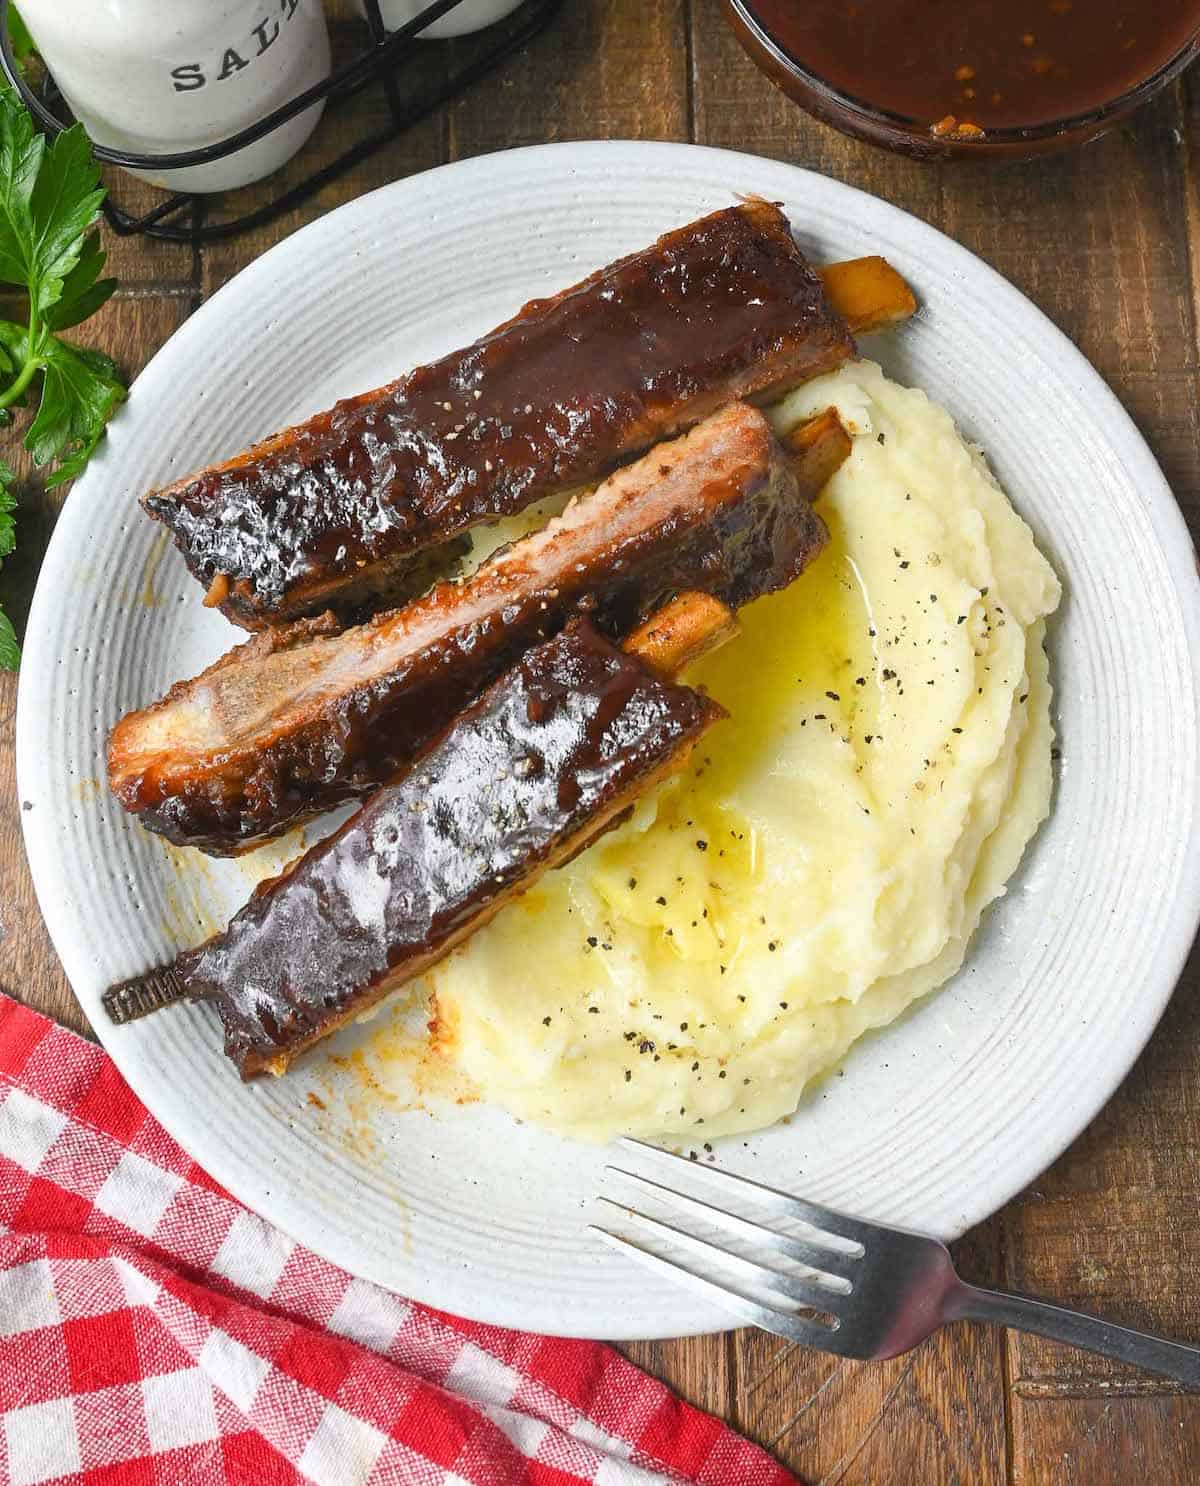 Three ribs on a plate with a side of mashed potatoes.